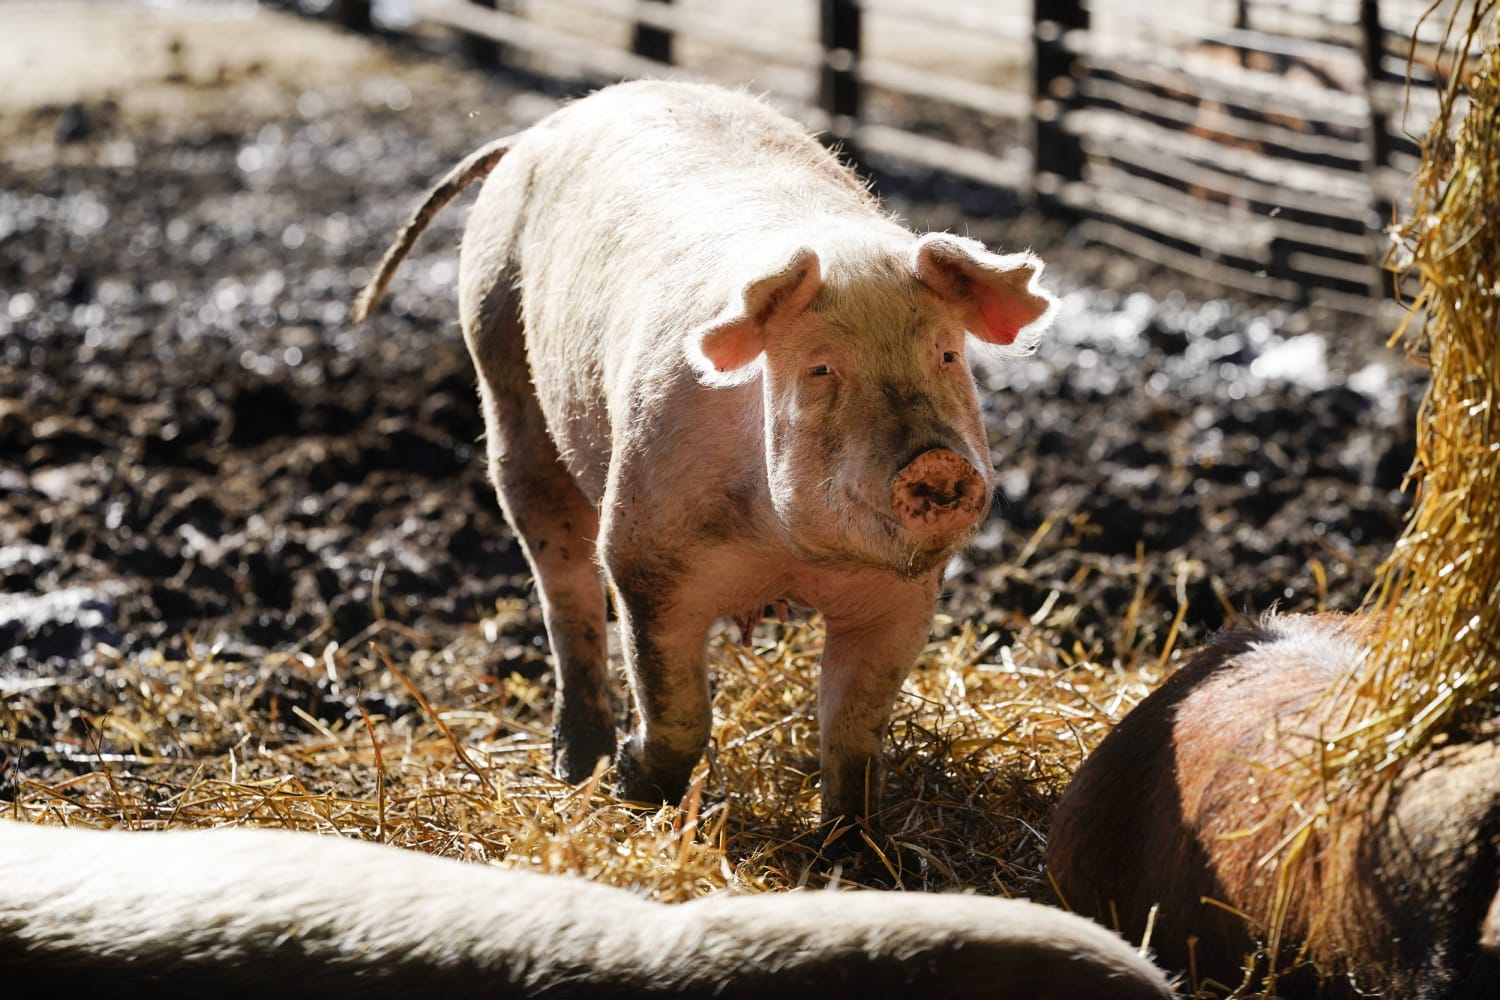 California grocers sue to stop animal welfare law that could lead to bacon shortage